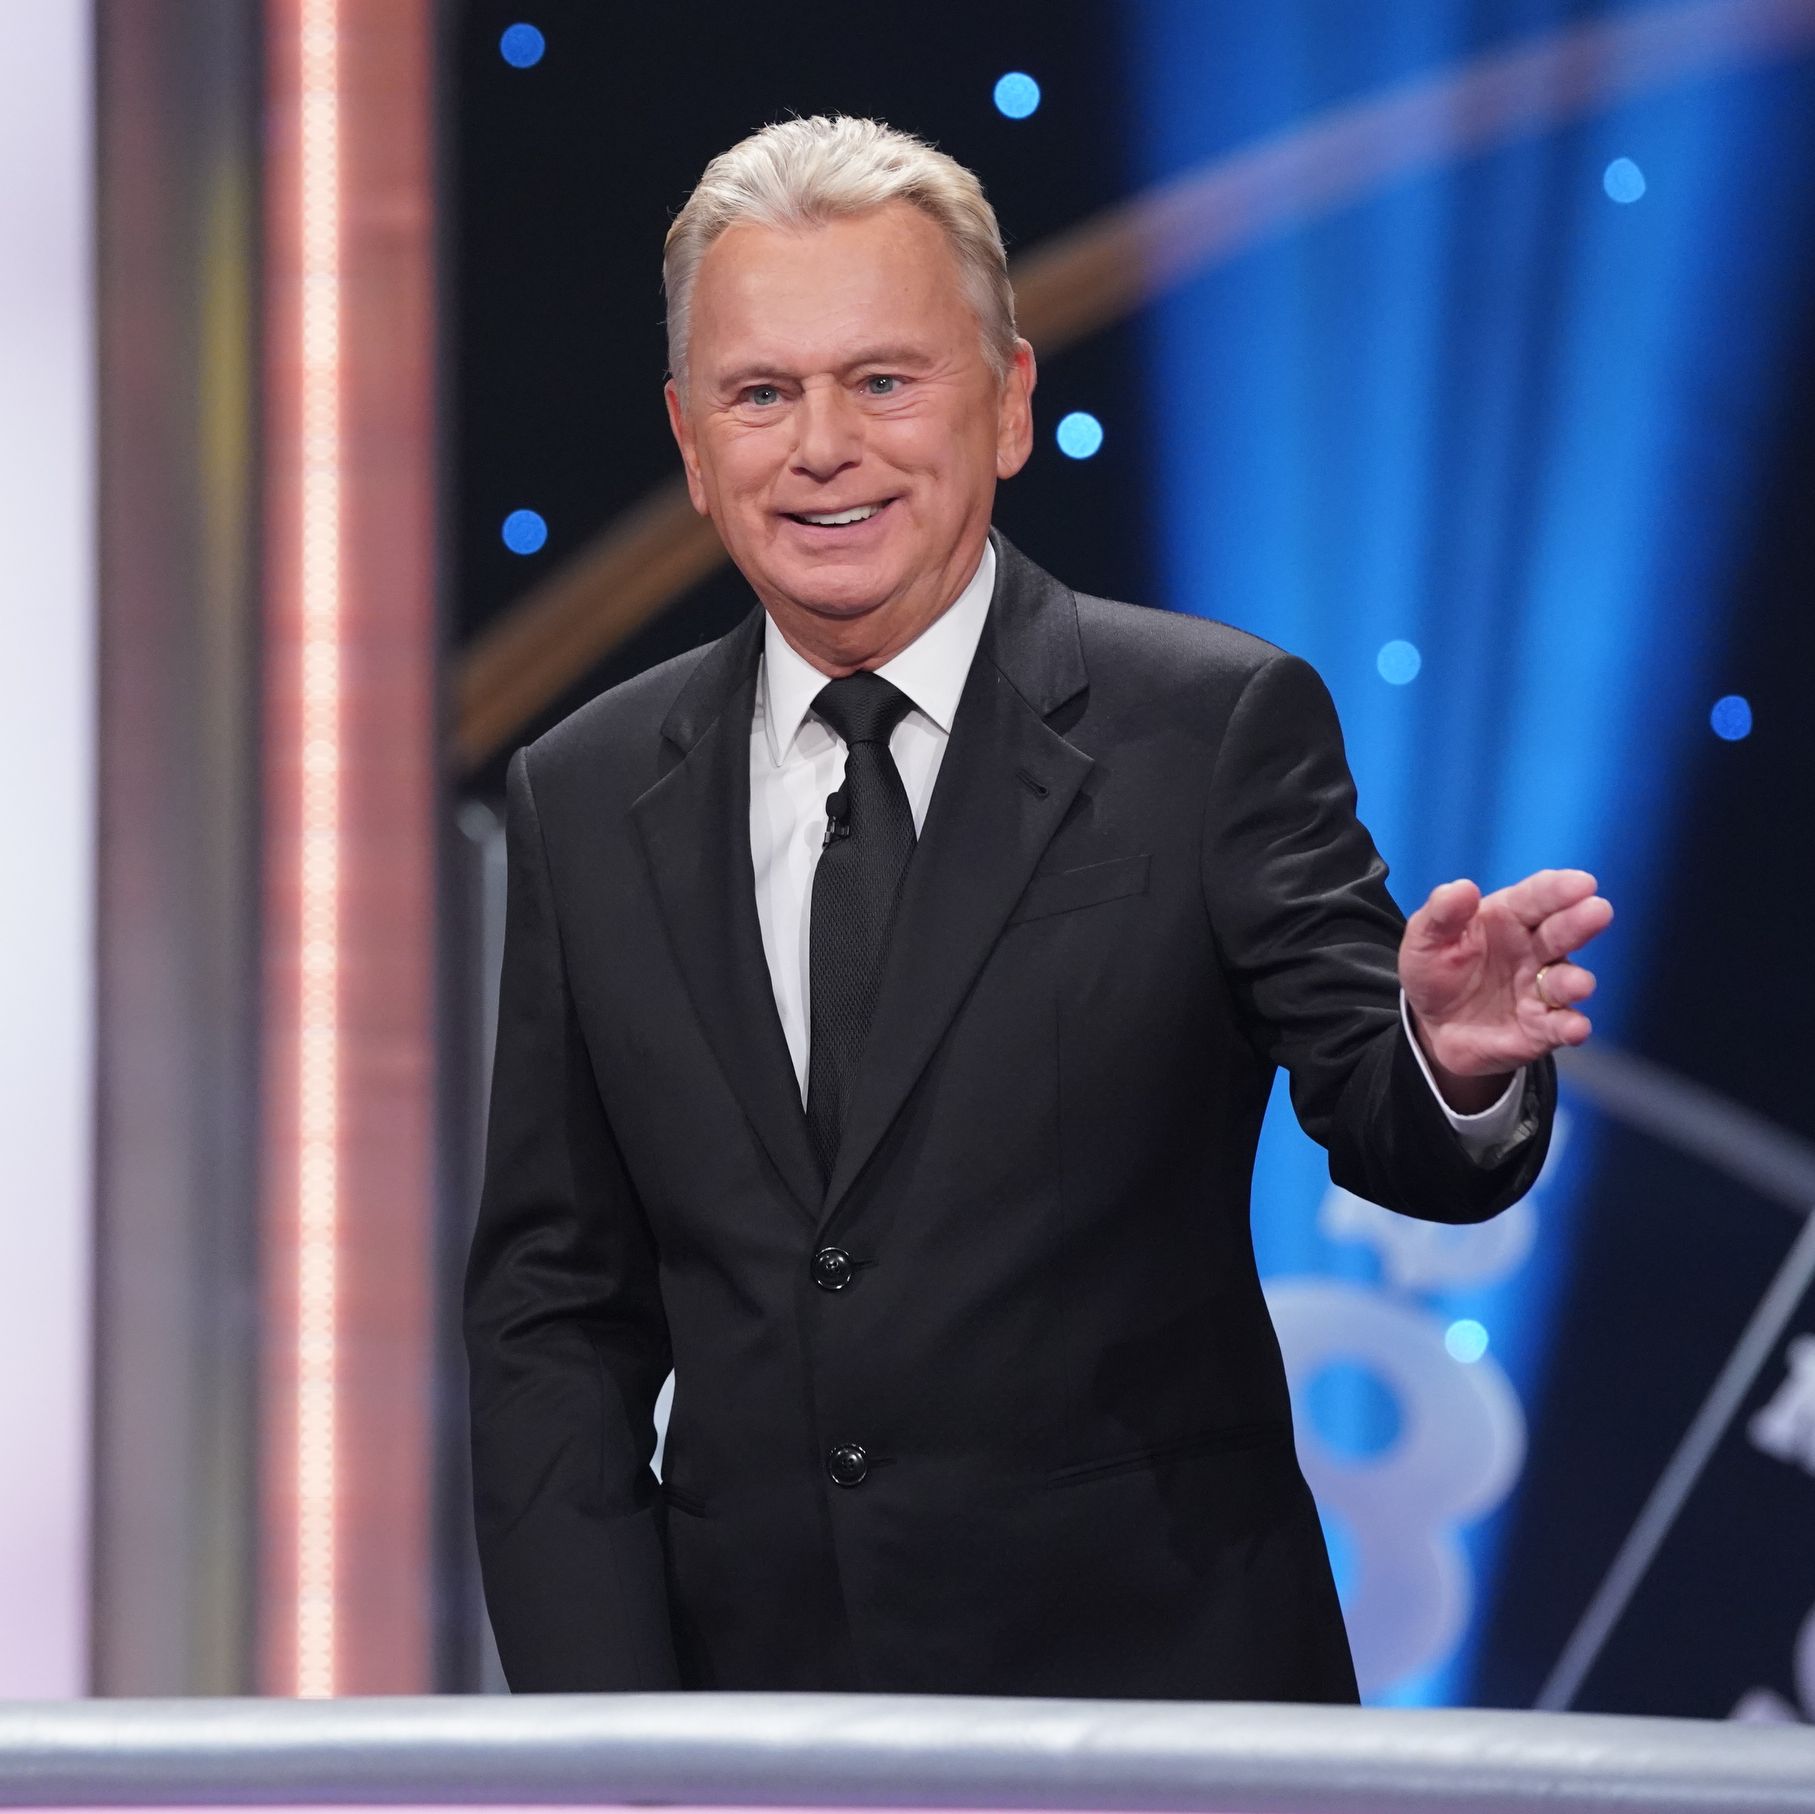 'Wheel of Fortune' Fans Are Completely Throwing Pat Sajak Under the Bus for His Past Comments